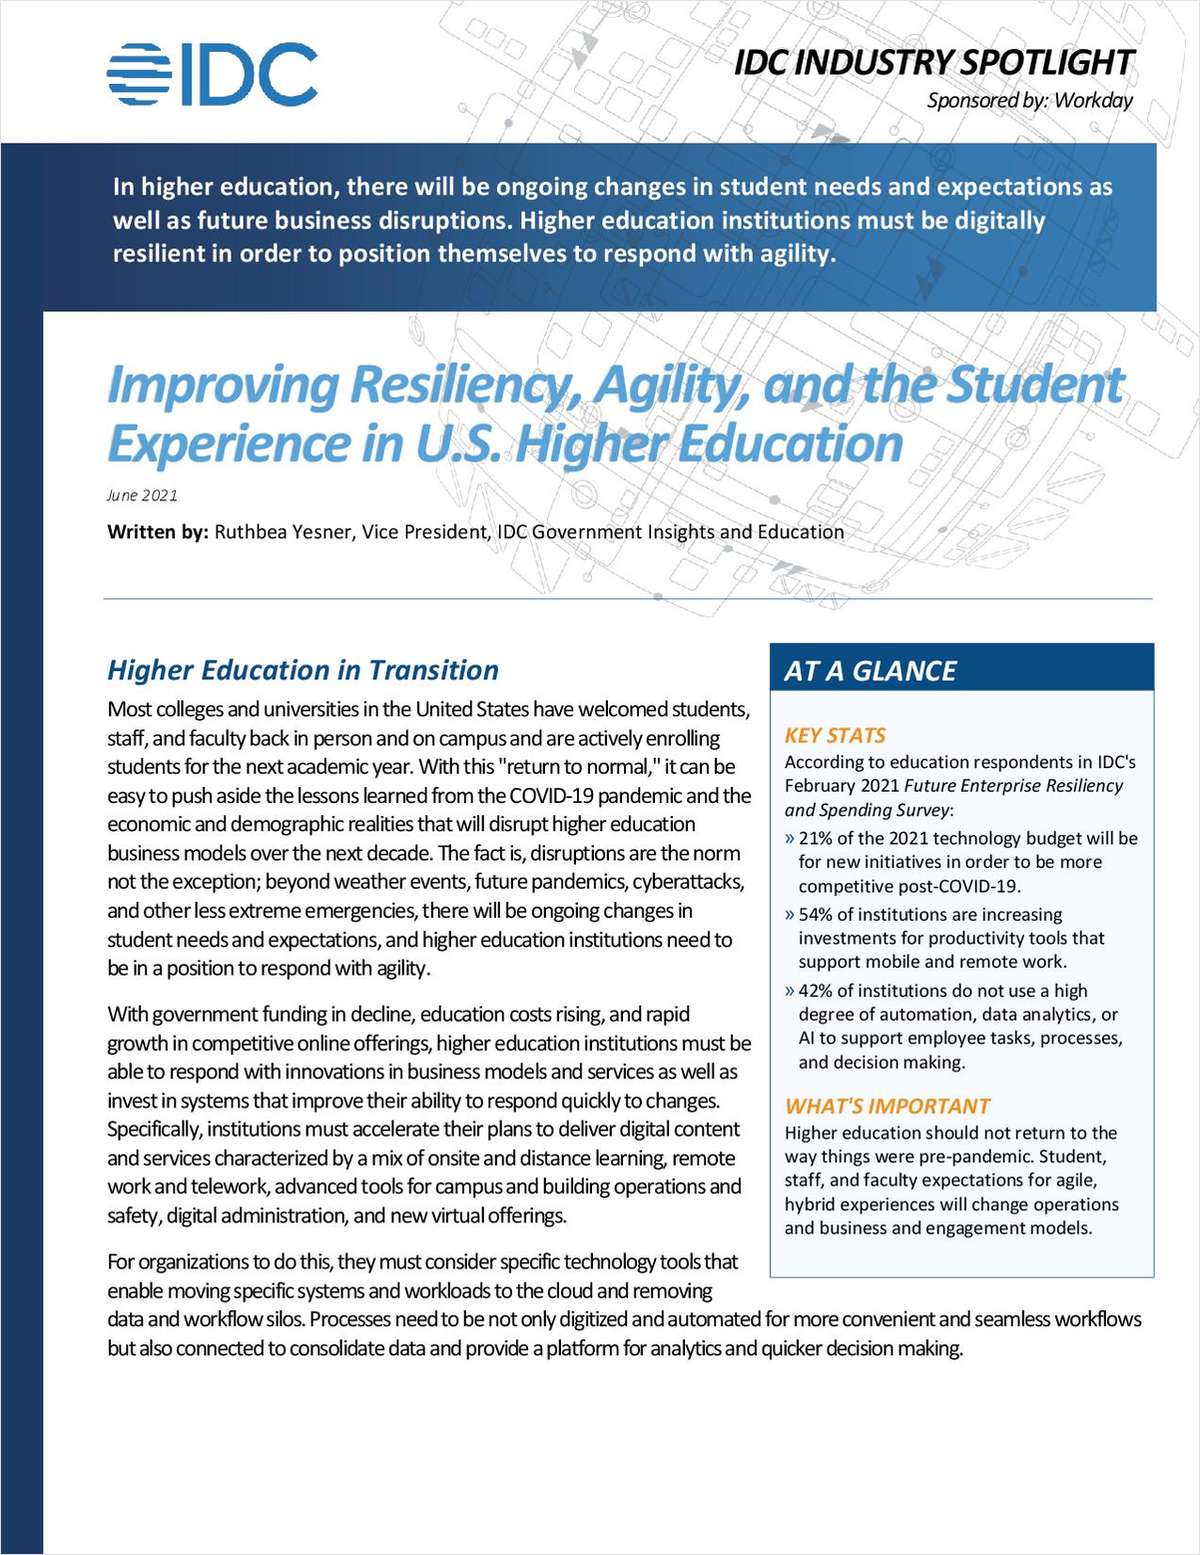 IDC Industry Spotlight: Improving Resiliency, Agility, and the Student Experience in U.S. Higher Education